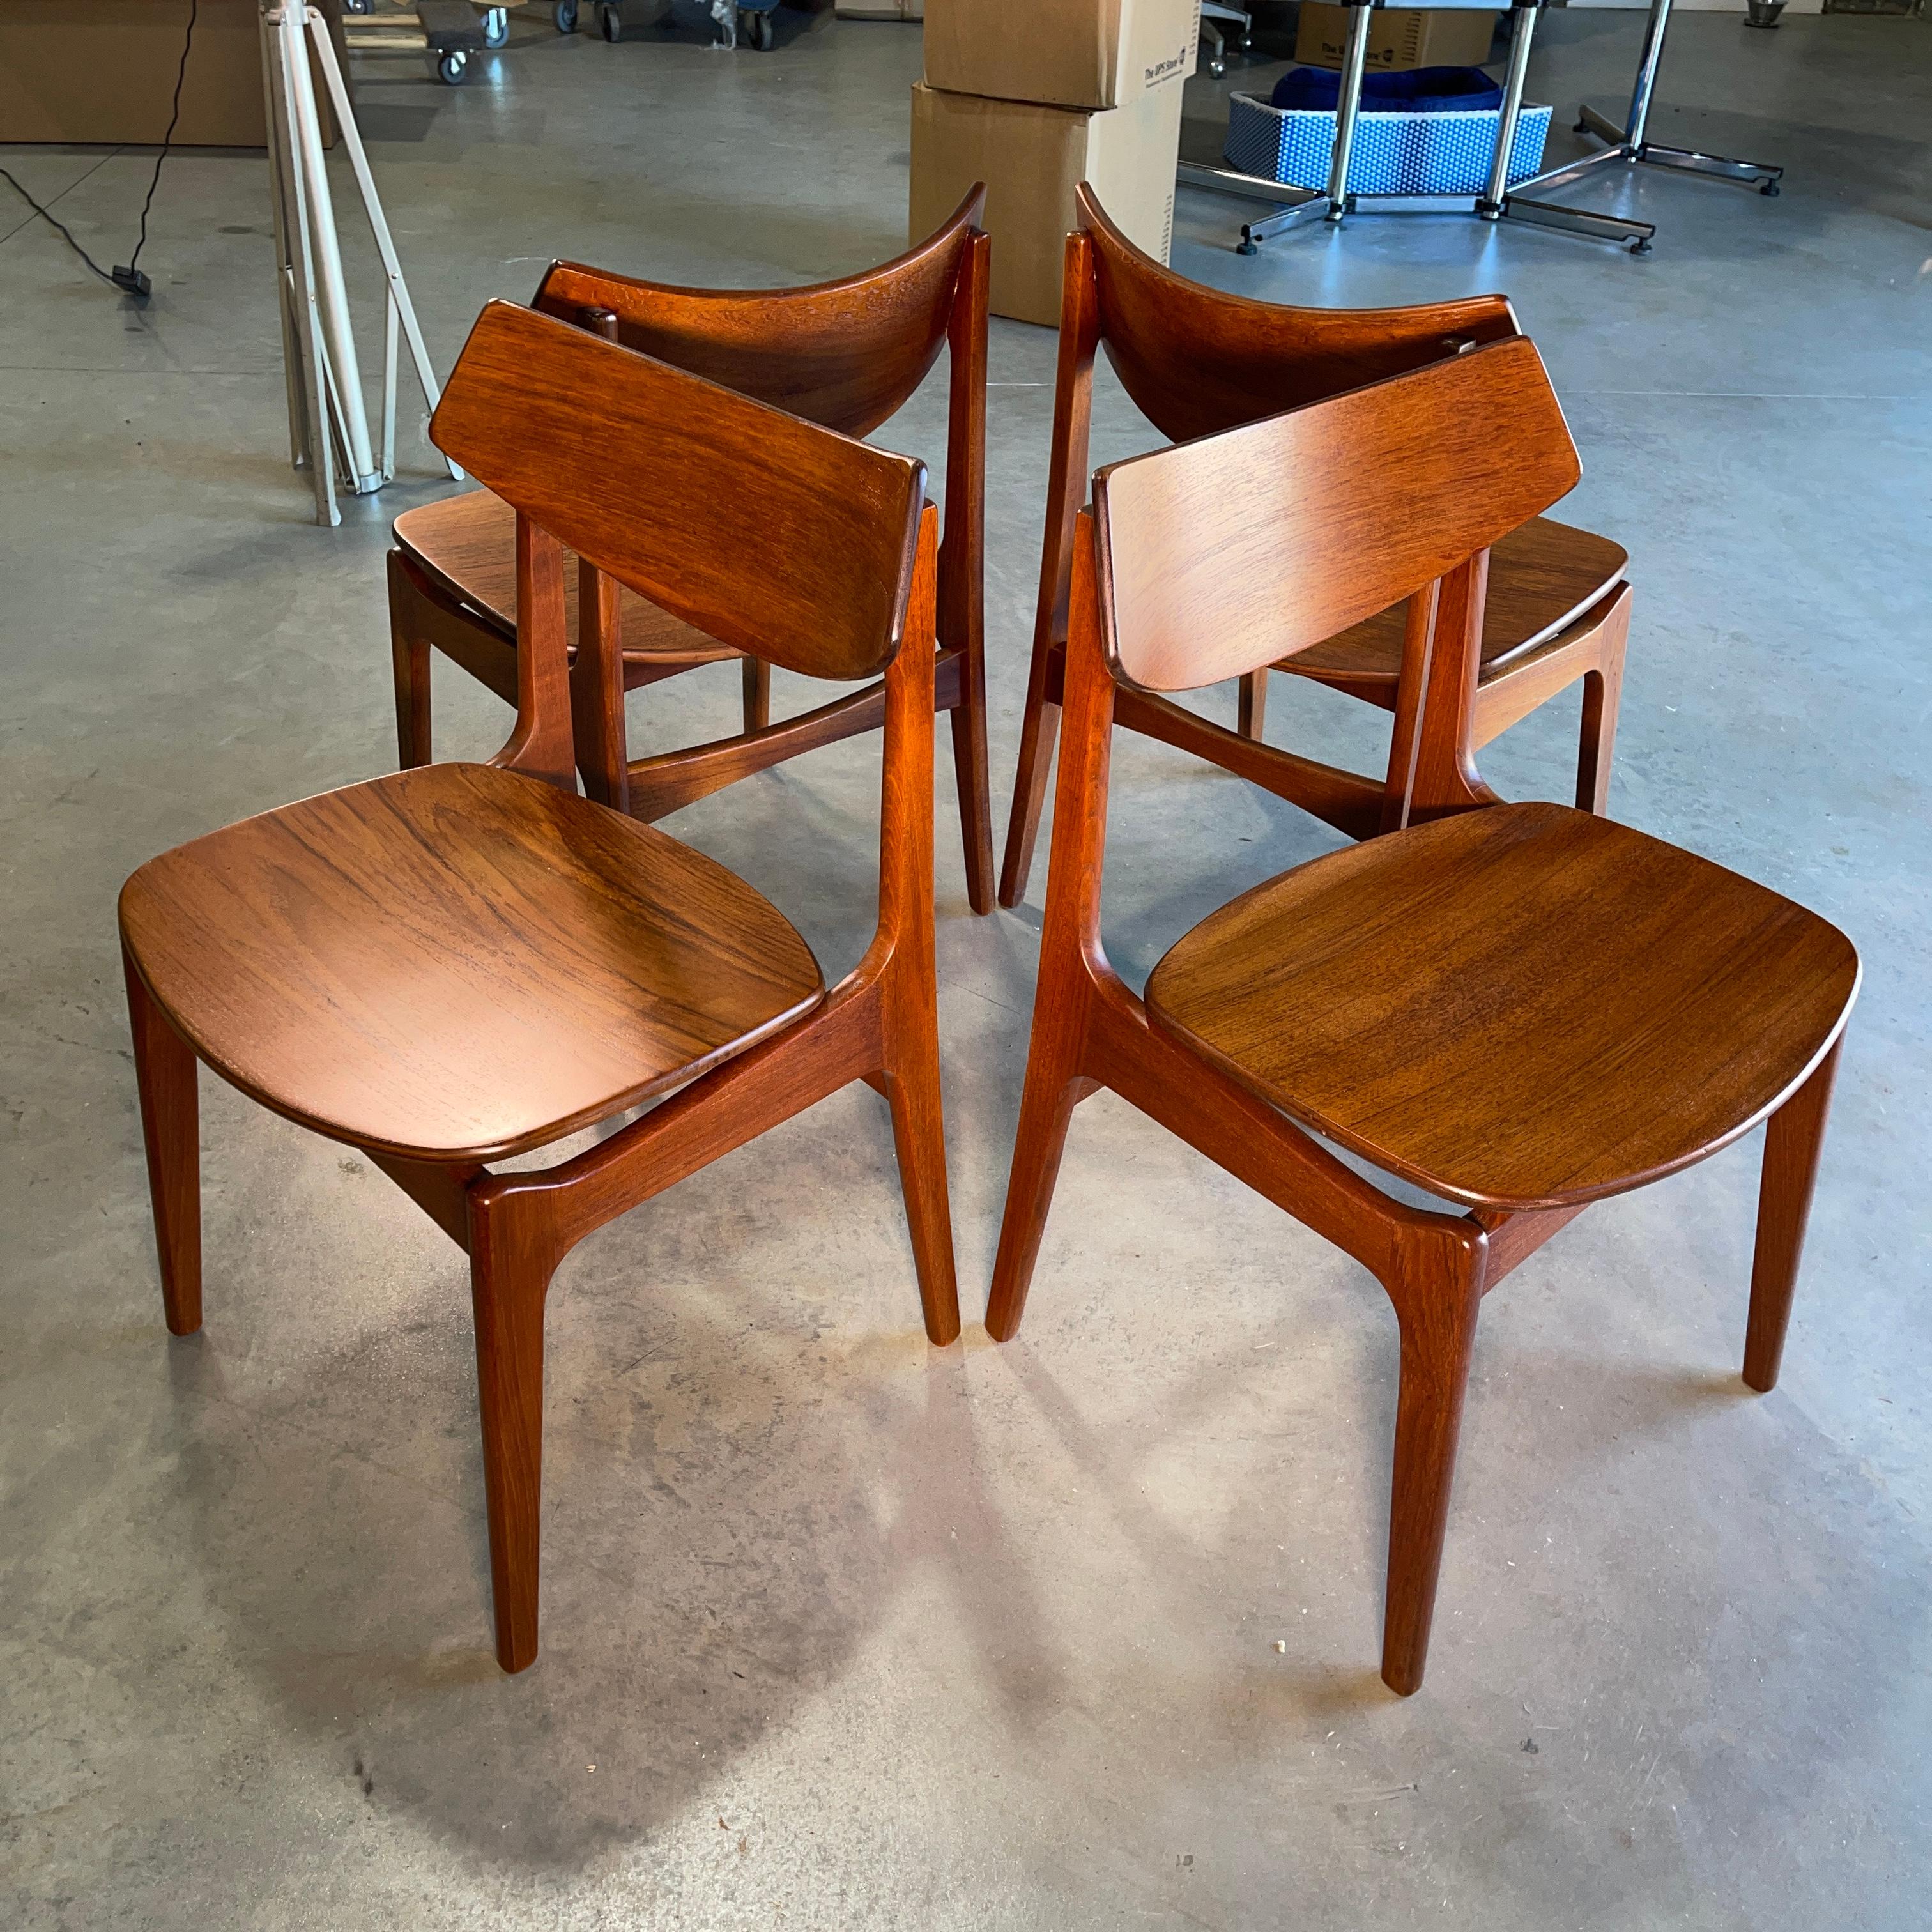 Set of 4 Teak Dining Chairs by Erik Buch for Funder-Schmidt & Madsen, Odense 2